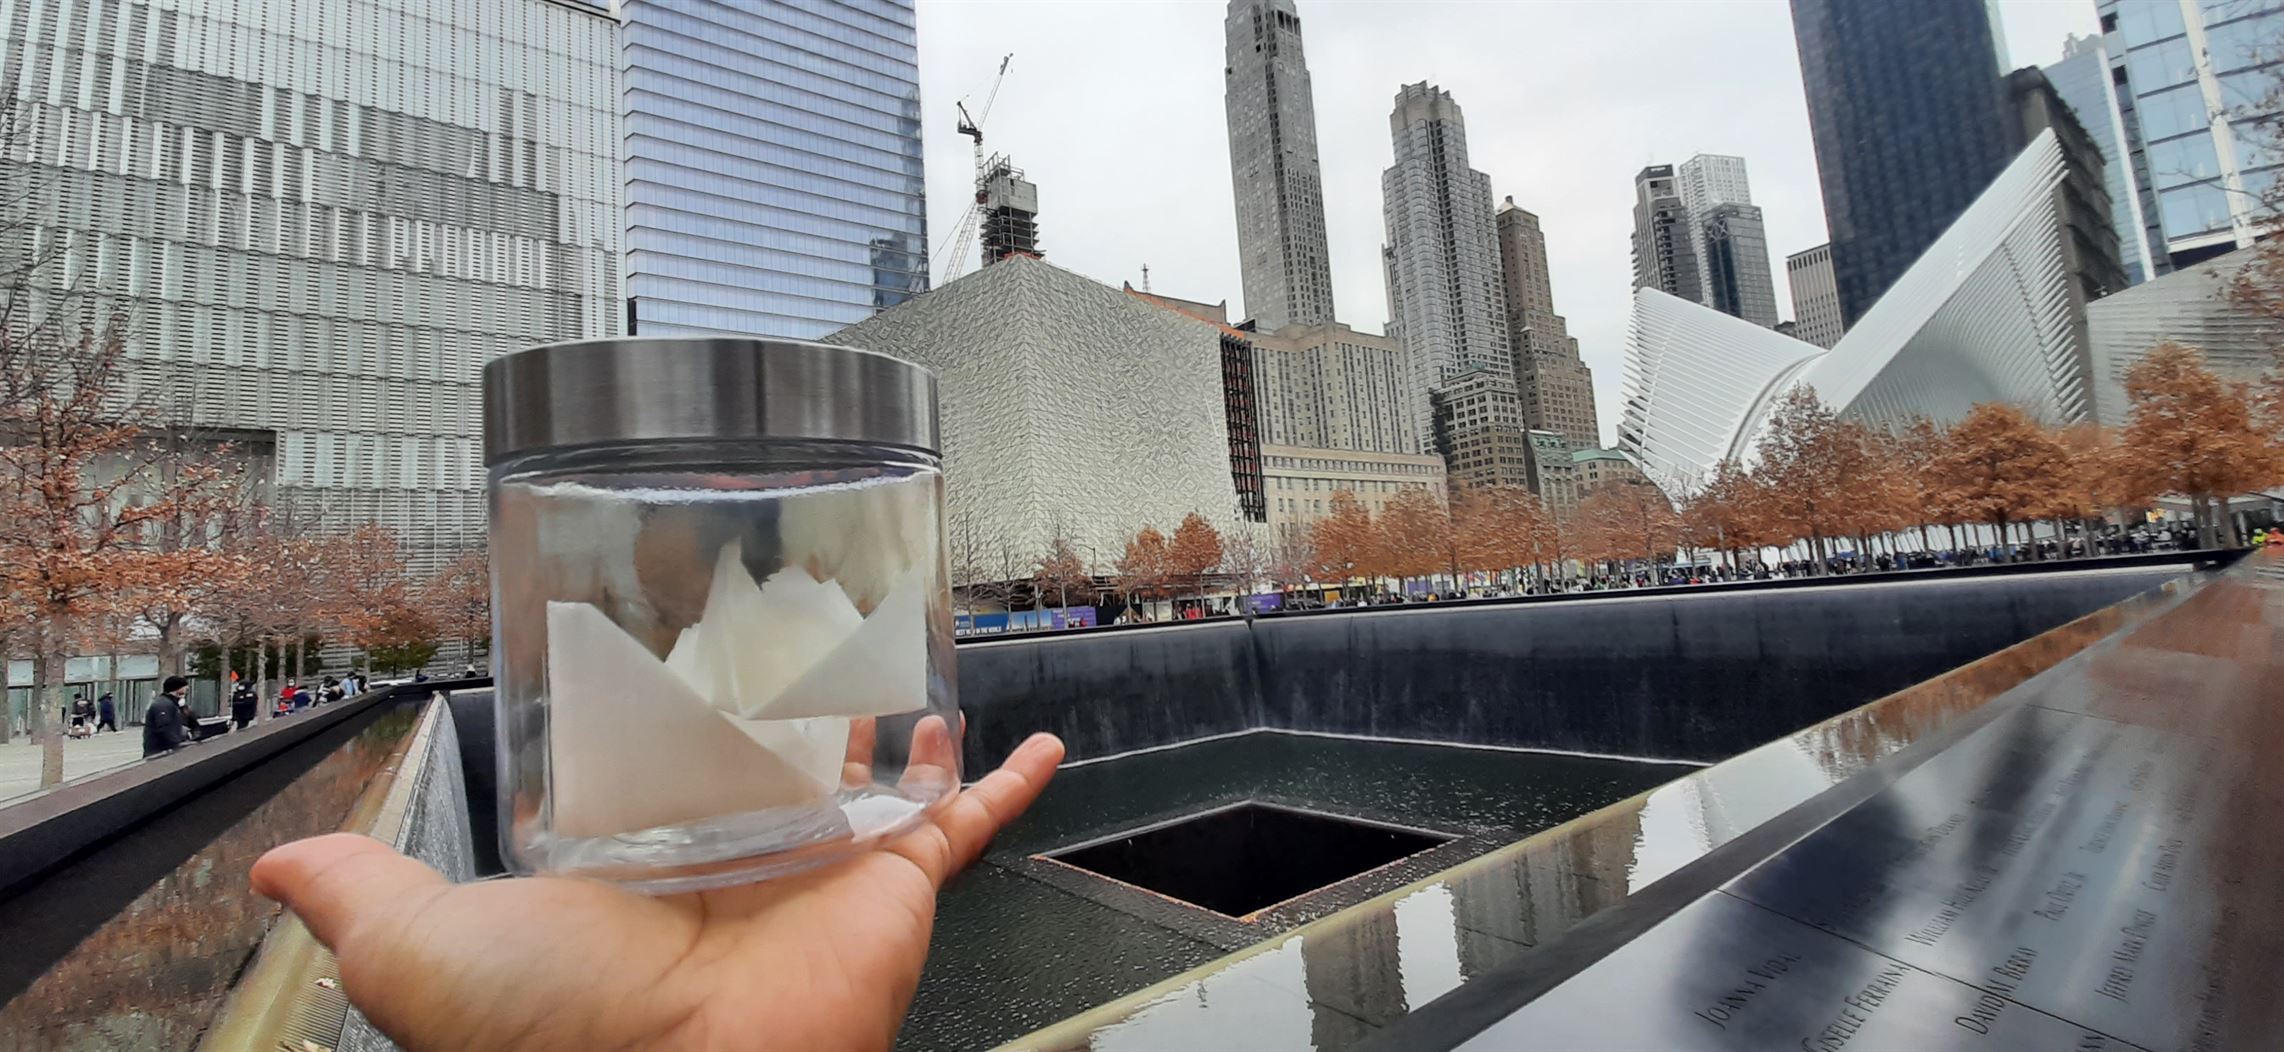 For his final location, Bhowmik chose to leave one of his bottles at the One World Trade Center in New York City to make a statement about being a brown-skinned individual in the U.S. Photo courtesy of Dr. Ritwik Bhowmik